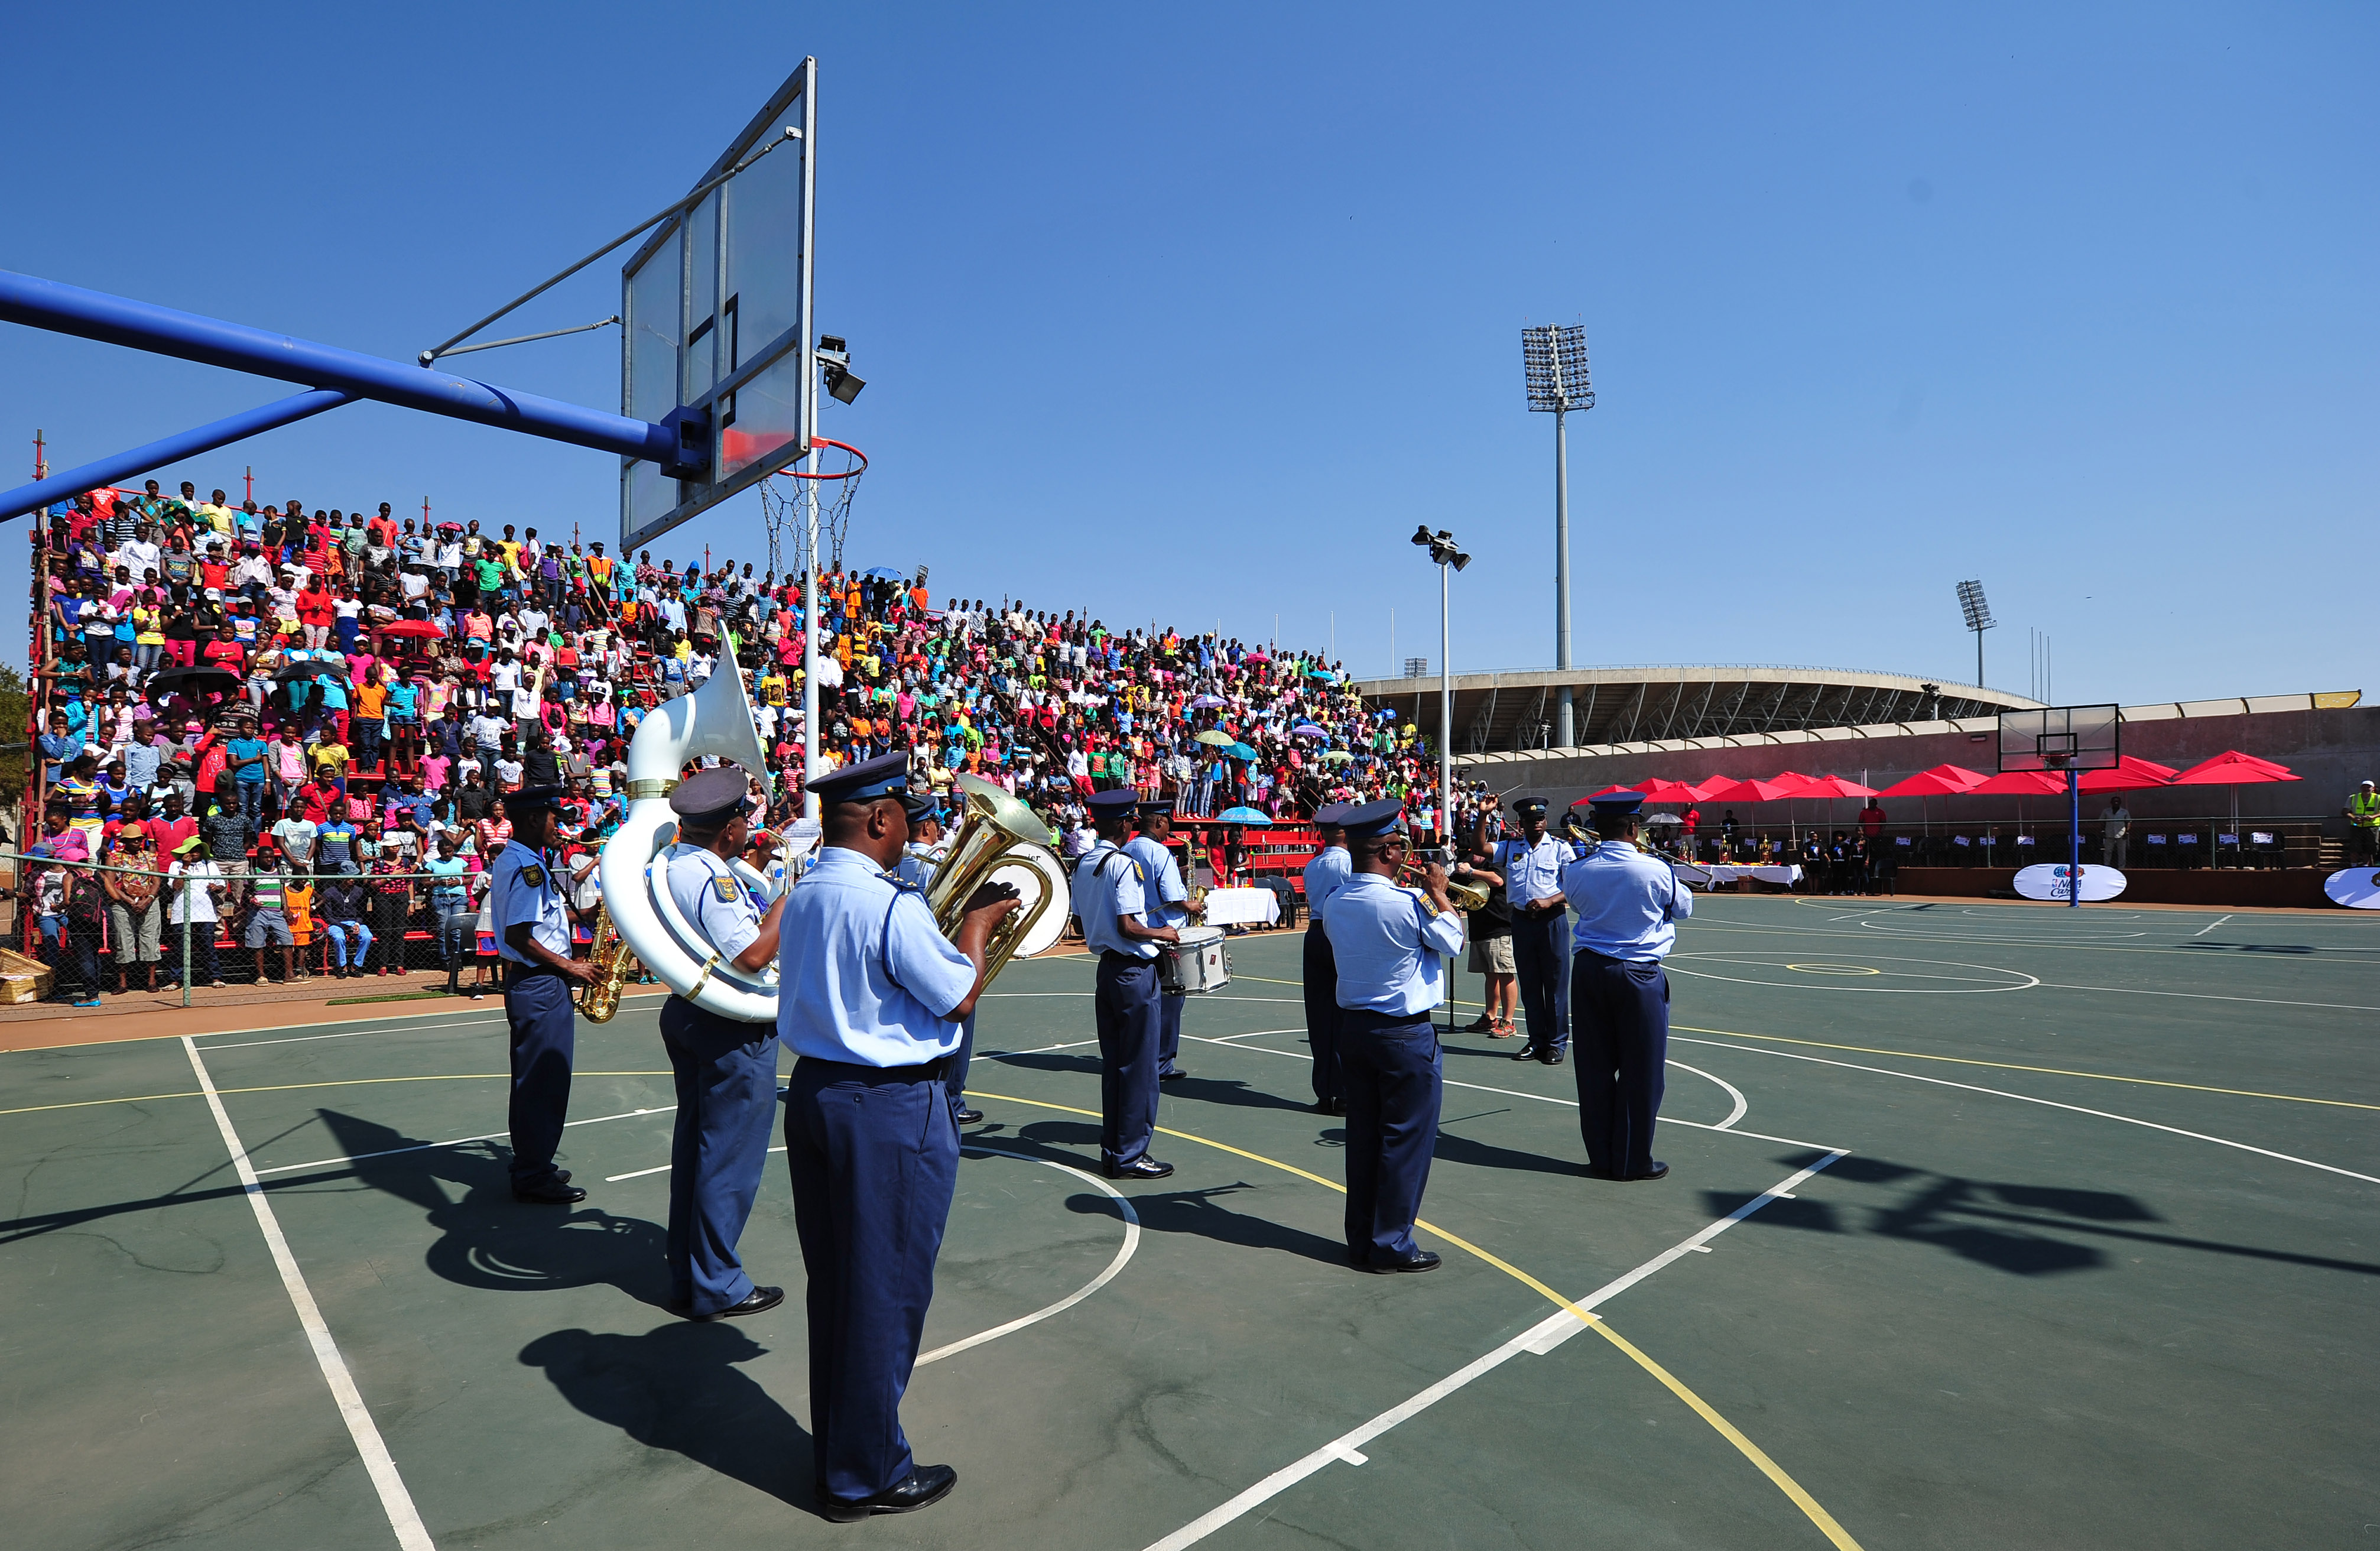 S.A.P.S (South African Police Service) Band performing the national anthem, 25 October 2014 